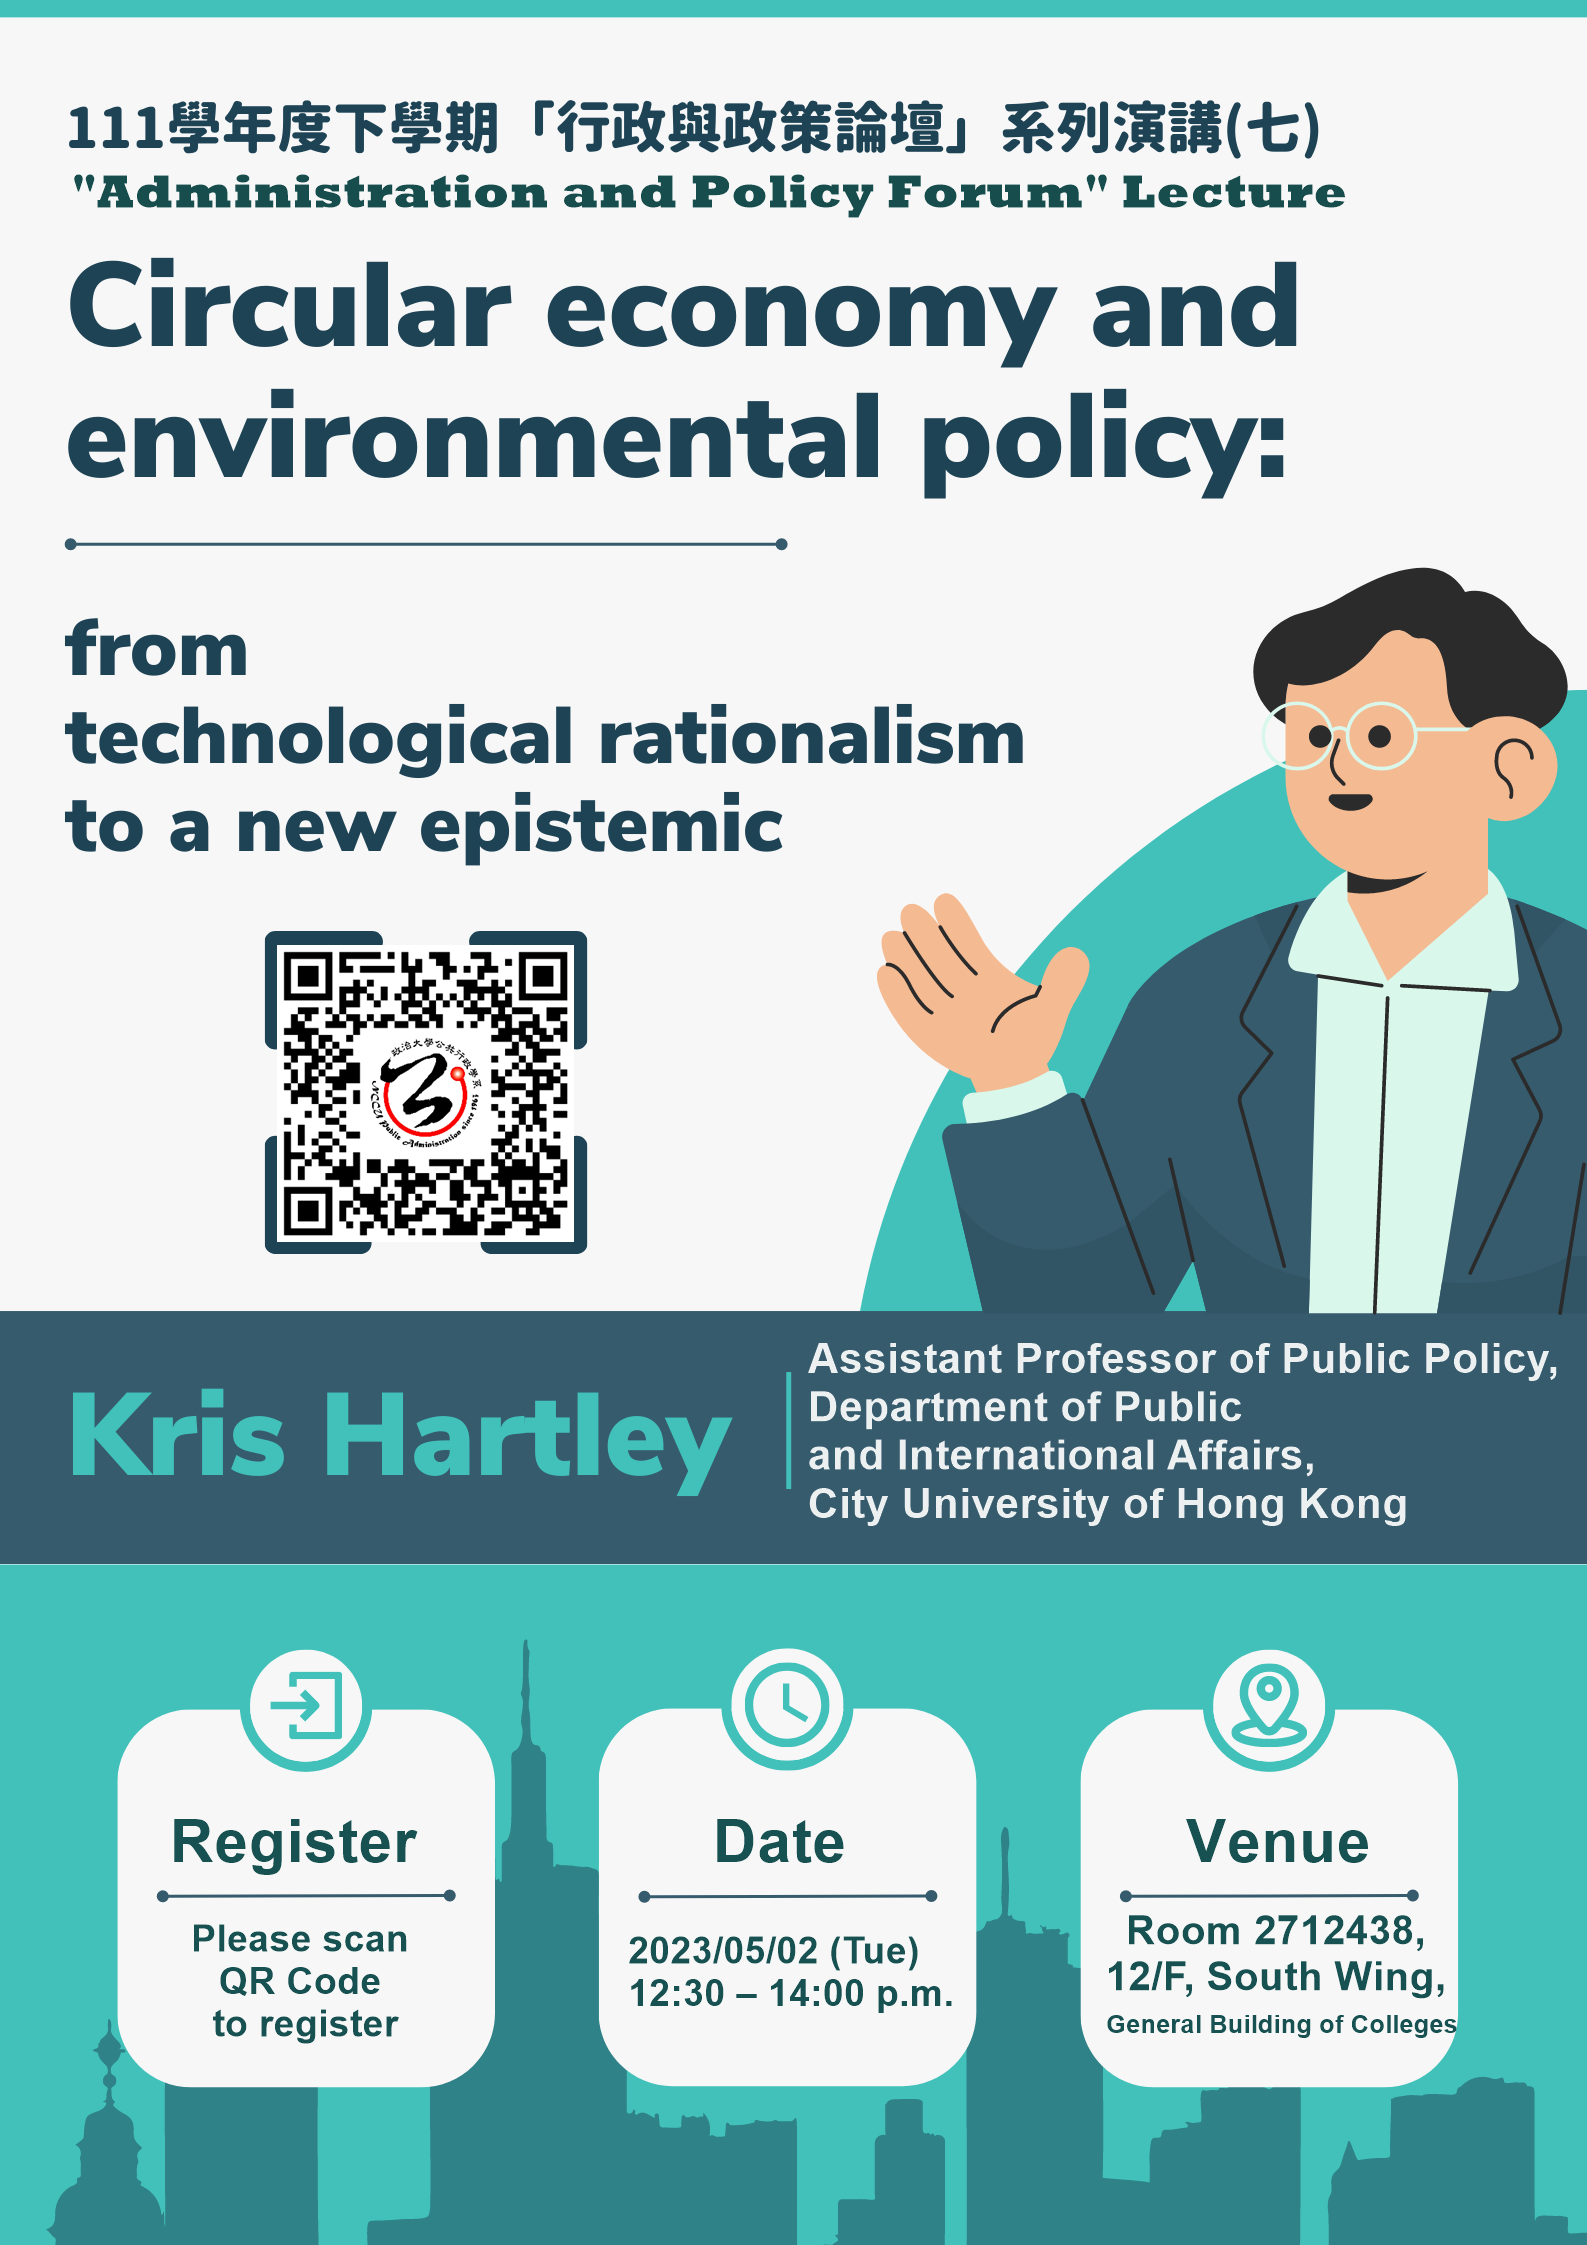 [Lecture]Circular economy and environmental policy: from technological rationalism to a new epistemic